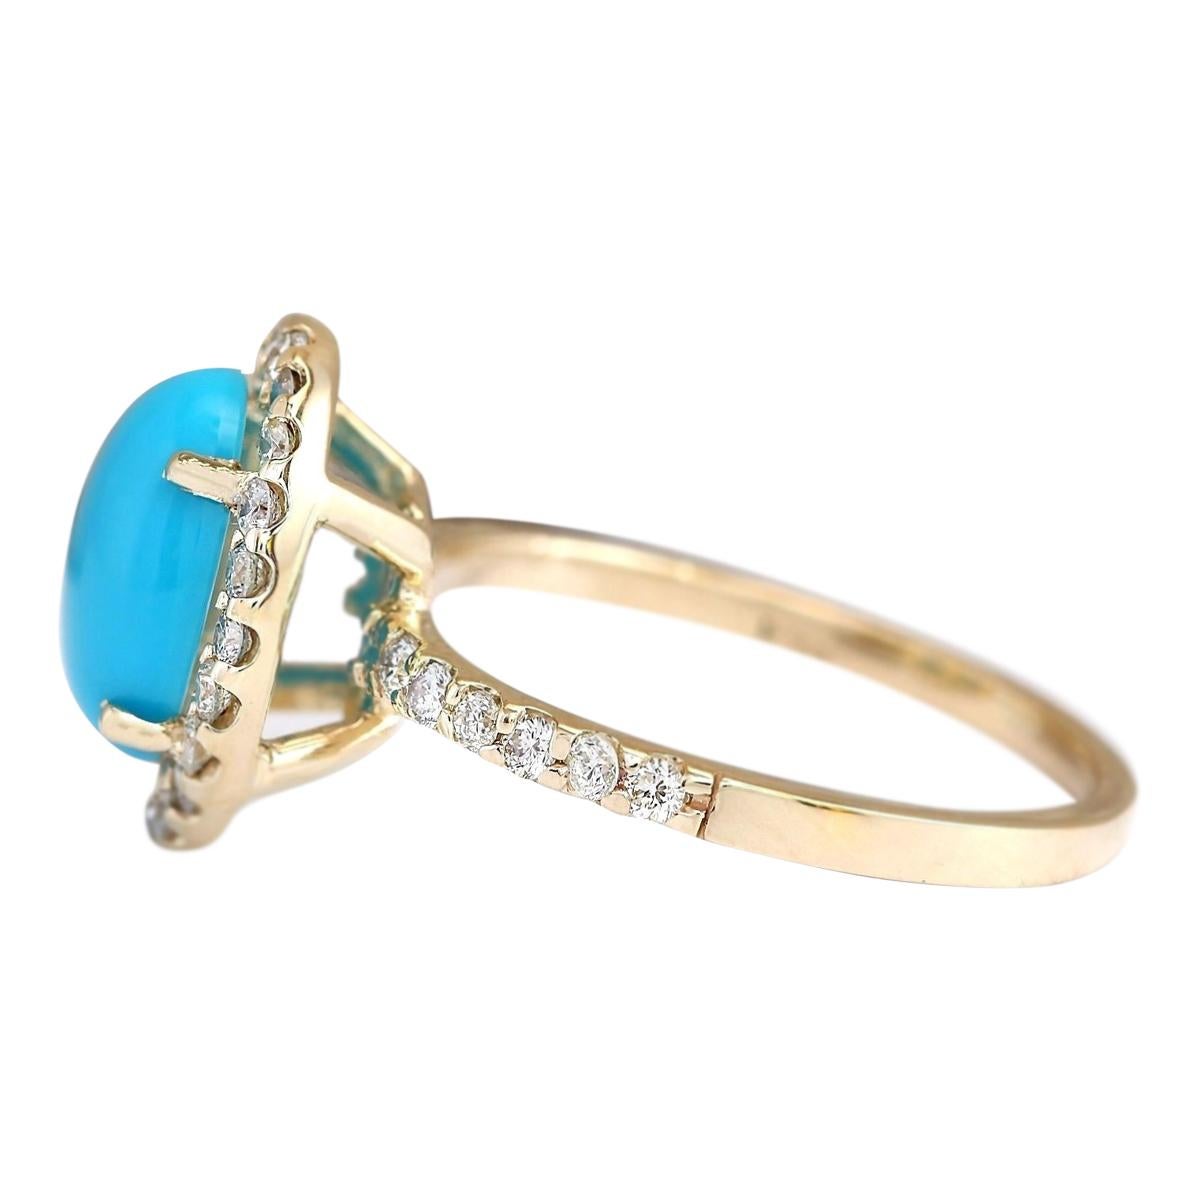 Stamped: 14K Yellow Gold
Total Ring Weight: 3.7 Grams
Total Natural Turquoise Weight is 2.07 Carat (Measures: 10.00x8.00 mm)
Color: Blue
Total Natural Diamond Weight is 0.60 Carat
Color: F-G, Clarity: VS2-SI1
Face Measures: 13.60x11.42 mm
Sku: